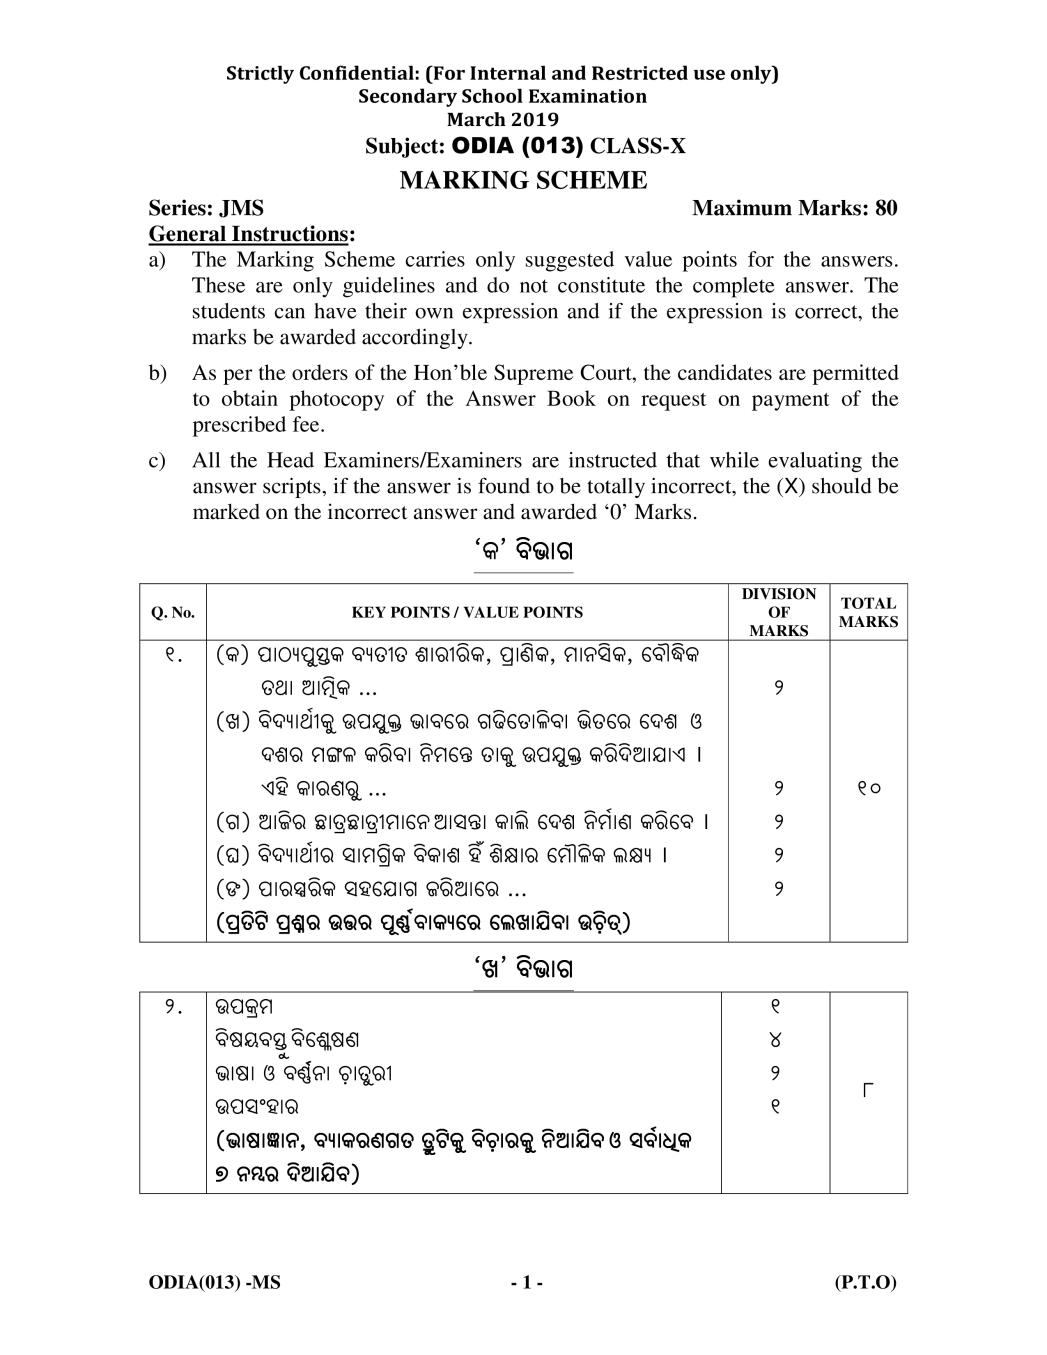 CBSE Class 10 Odia Question Paper 2019 Solutions - Page 1